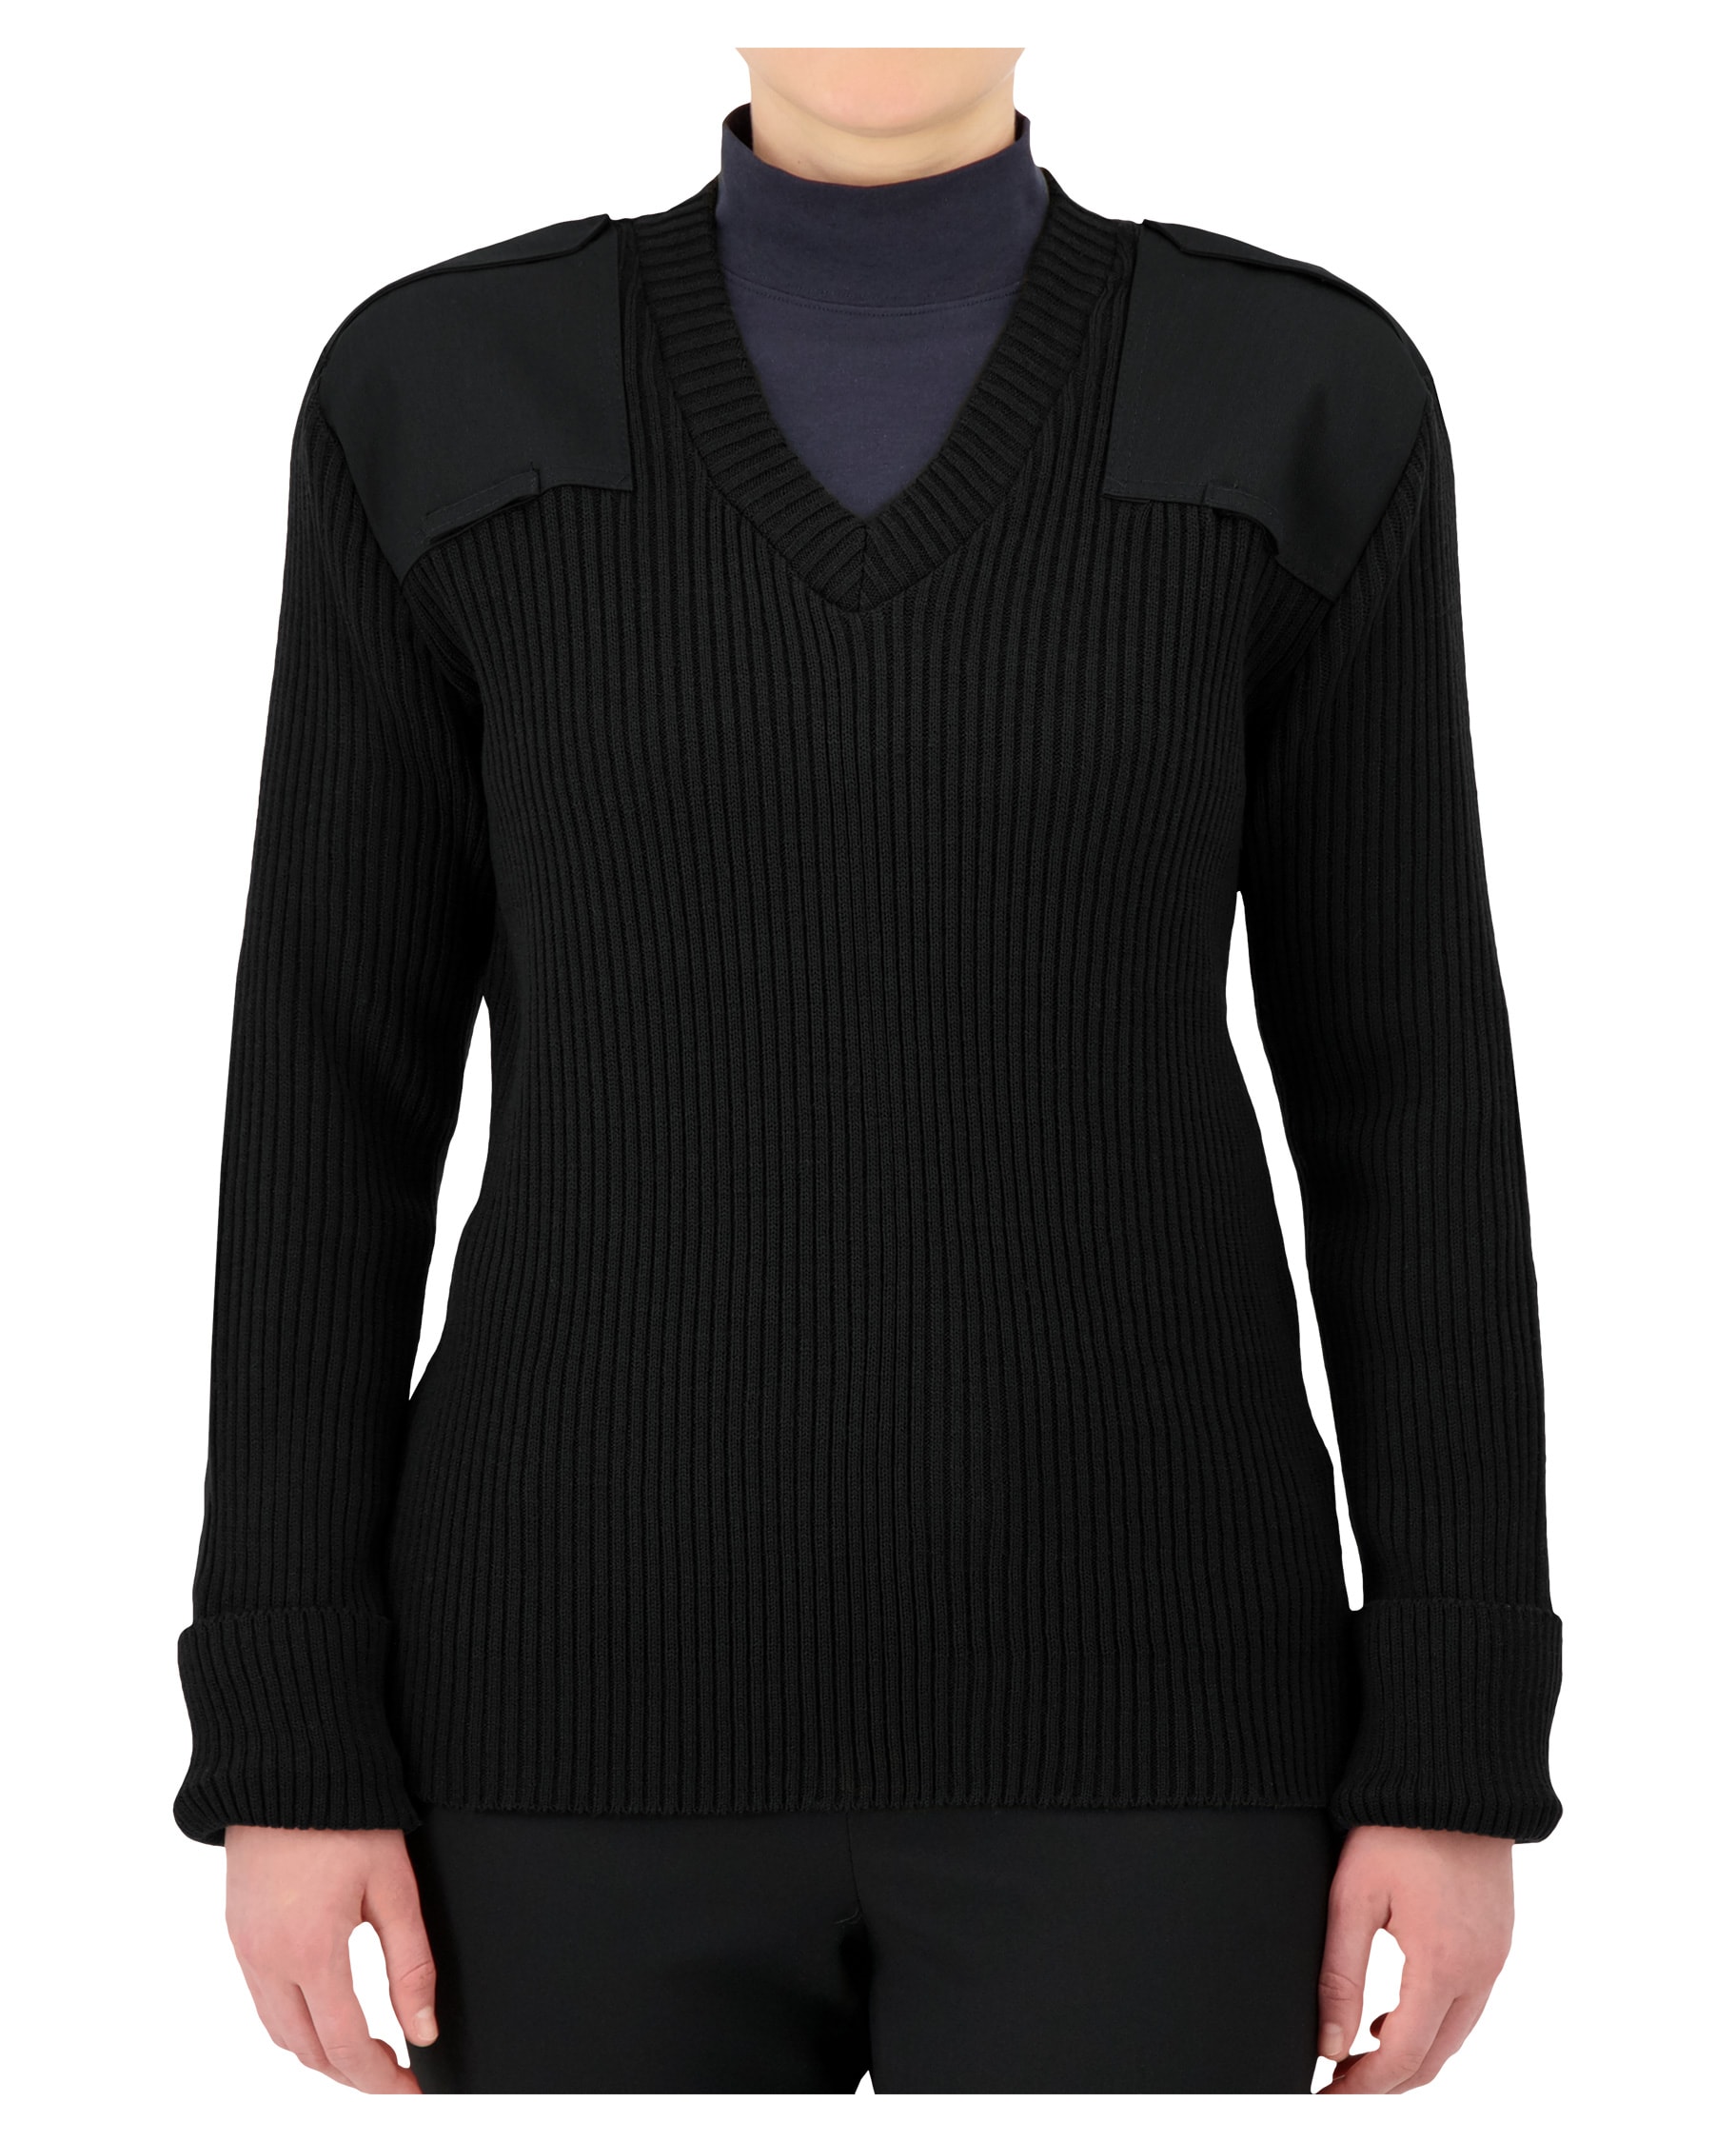 black v-neck sweater with shoulder and elbow patches